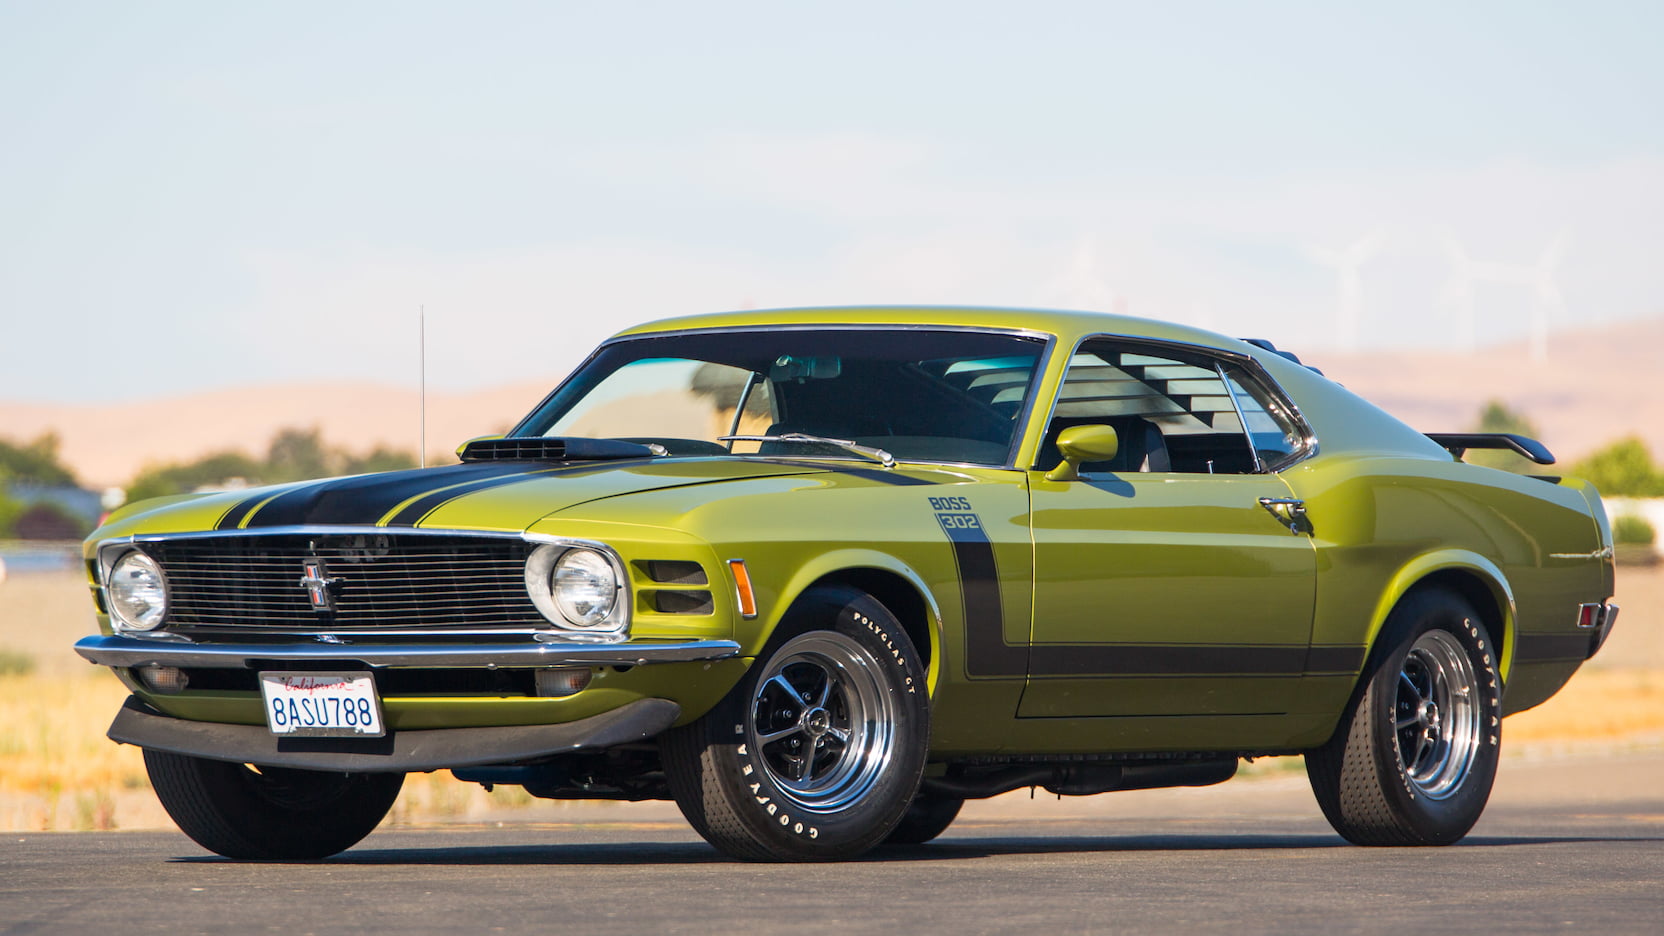 Medium Lime 1970 Ford Mustang